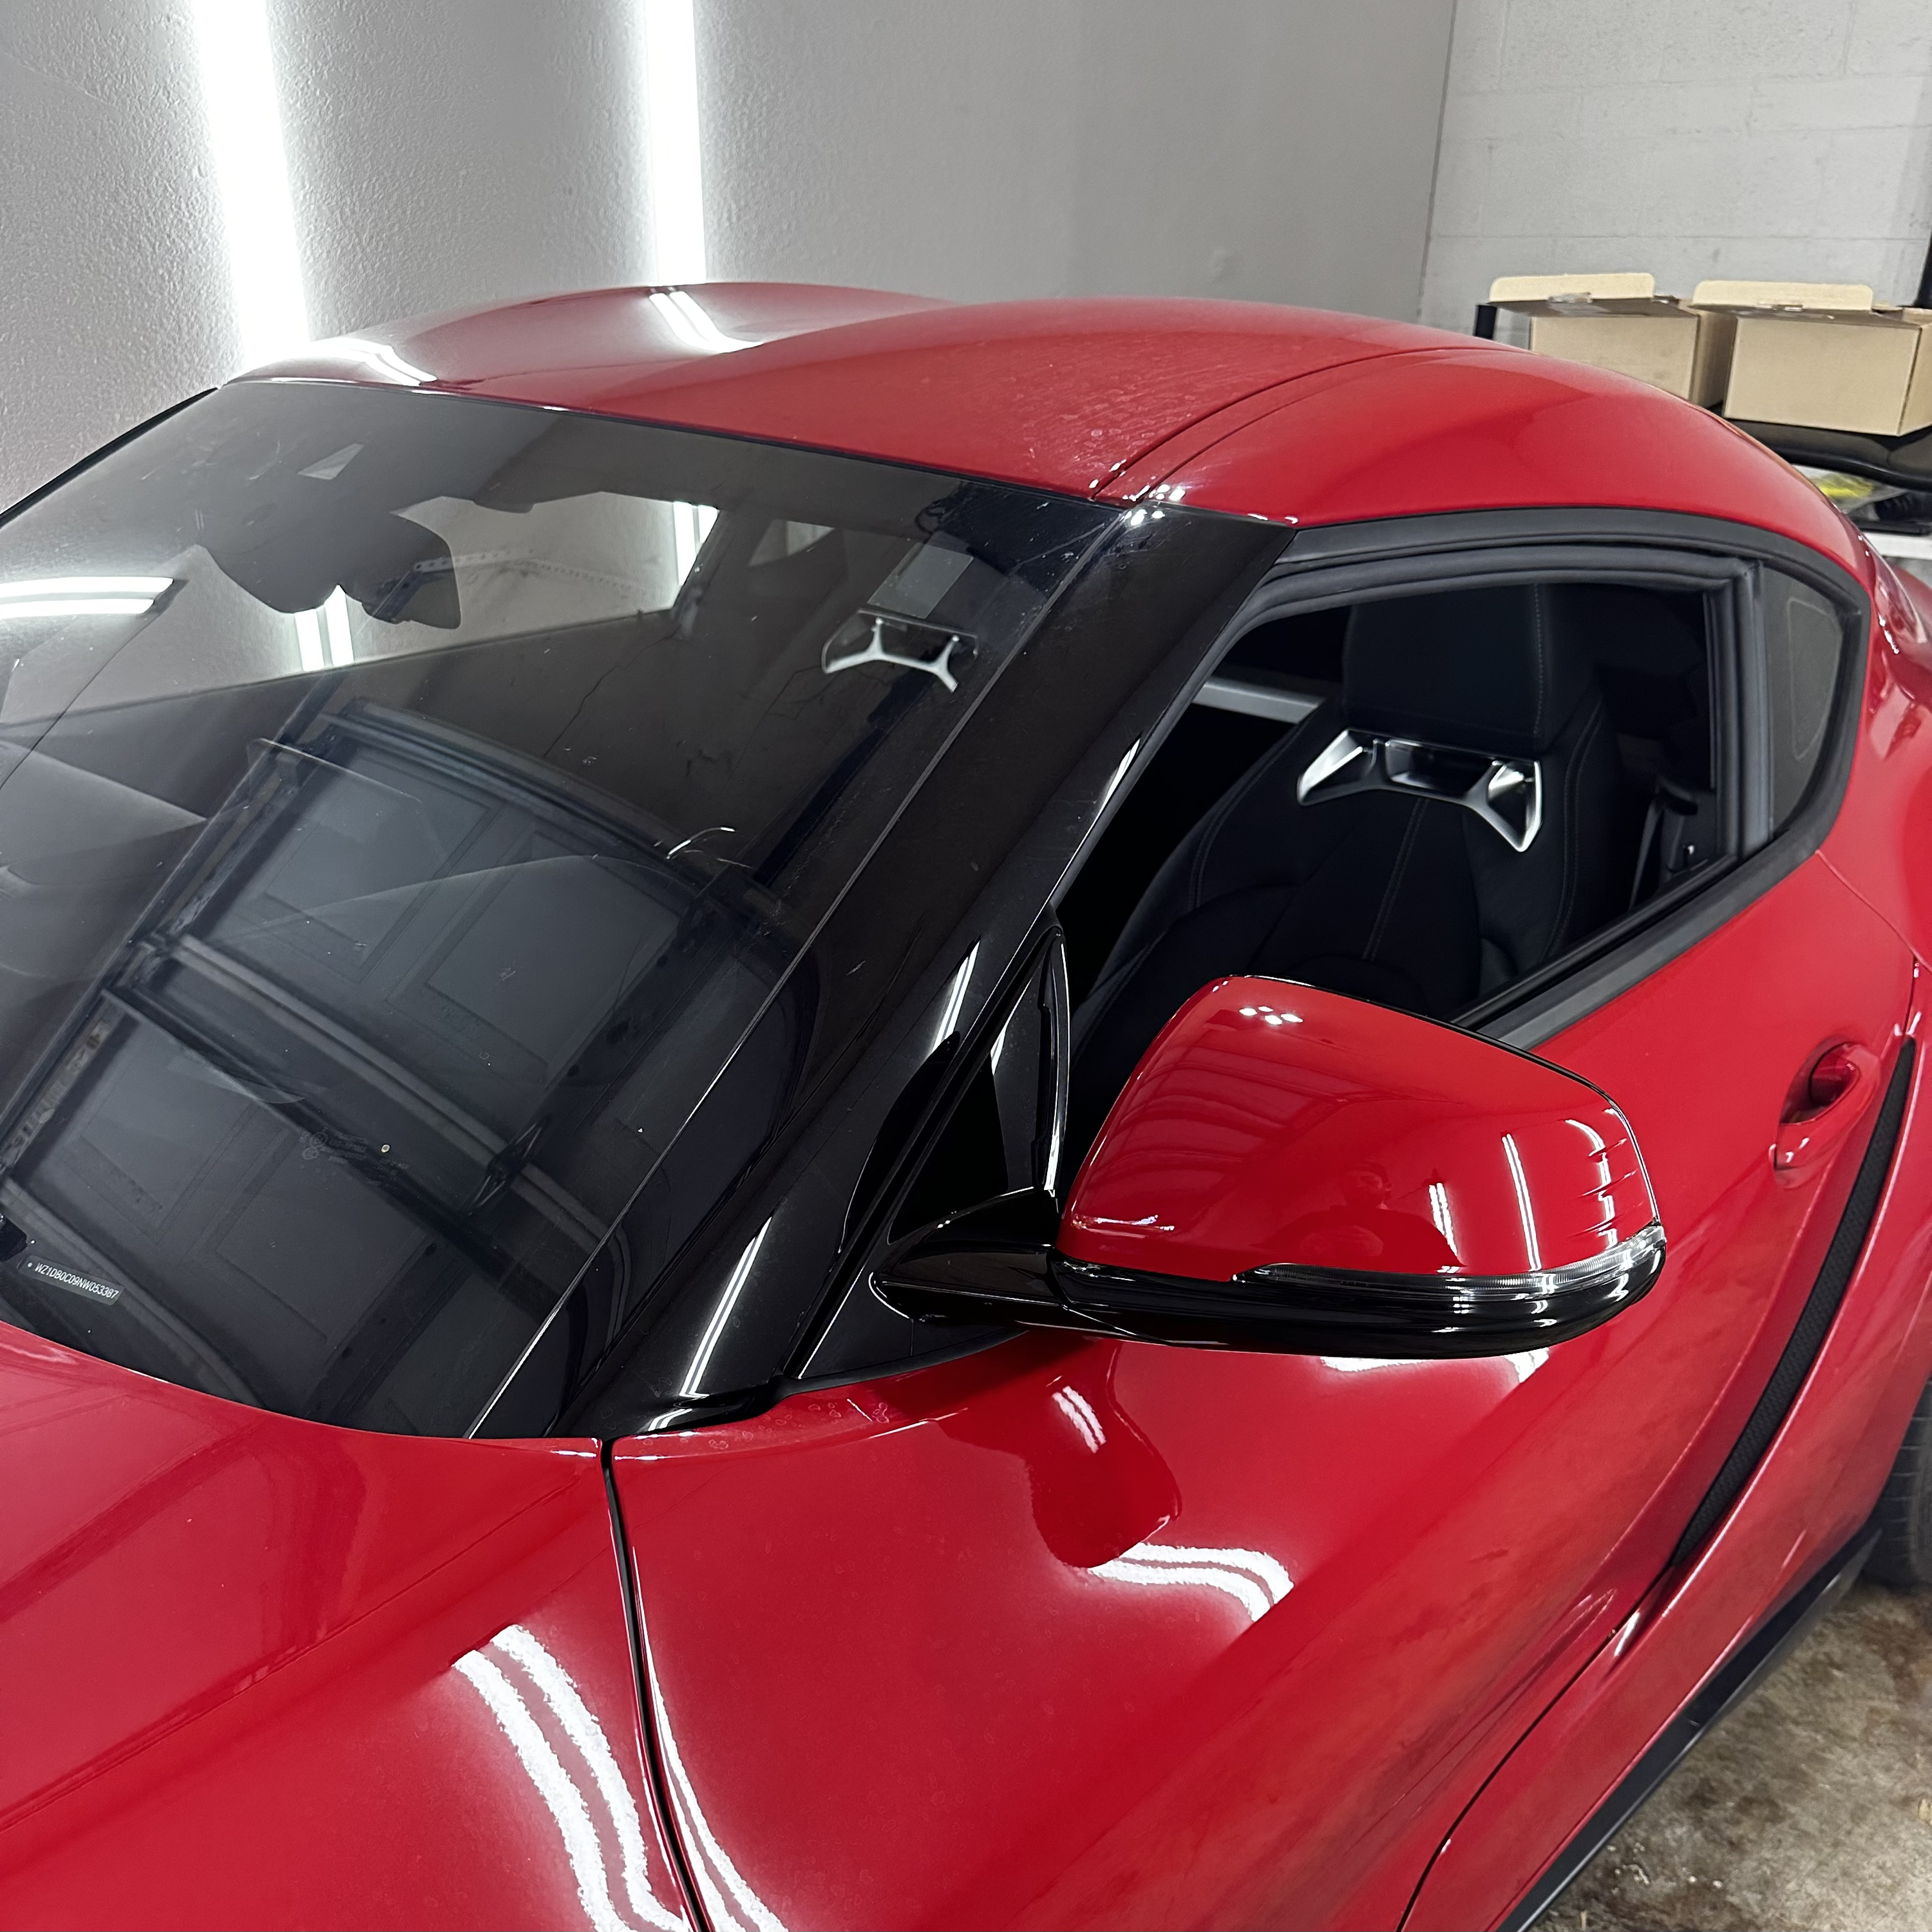 OEM renaissance red mirror cap upgrade from the matte black for 